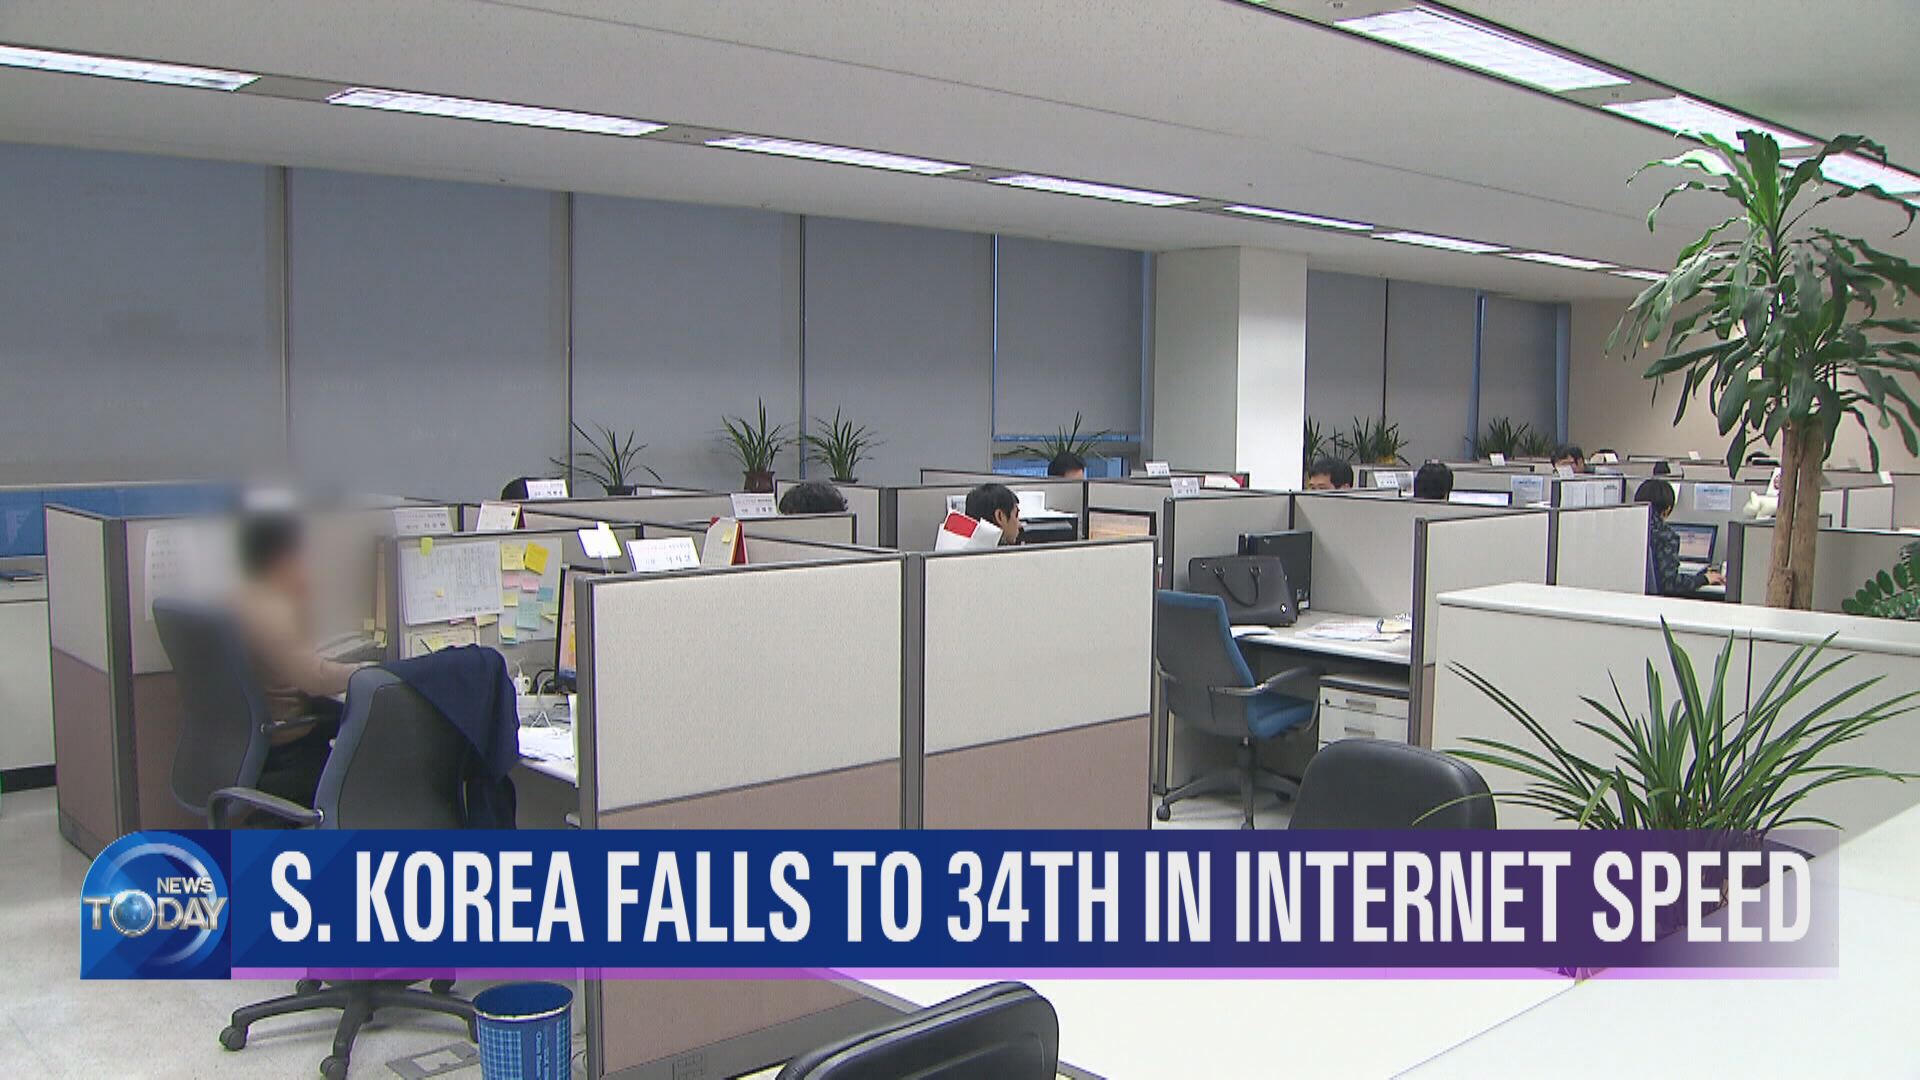 S. KOREA FALLS TO 34TH IN INTERNET SPEED